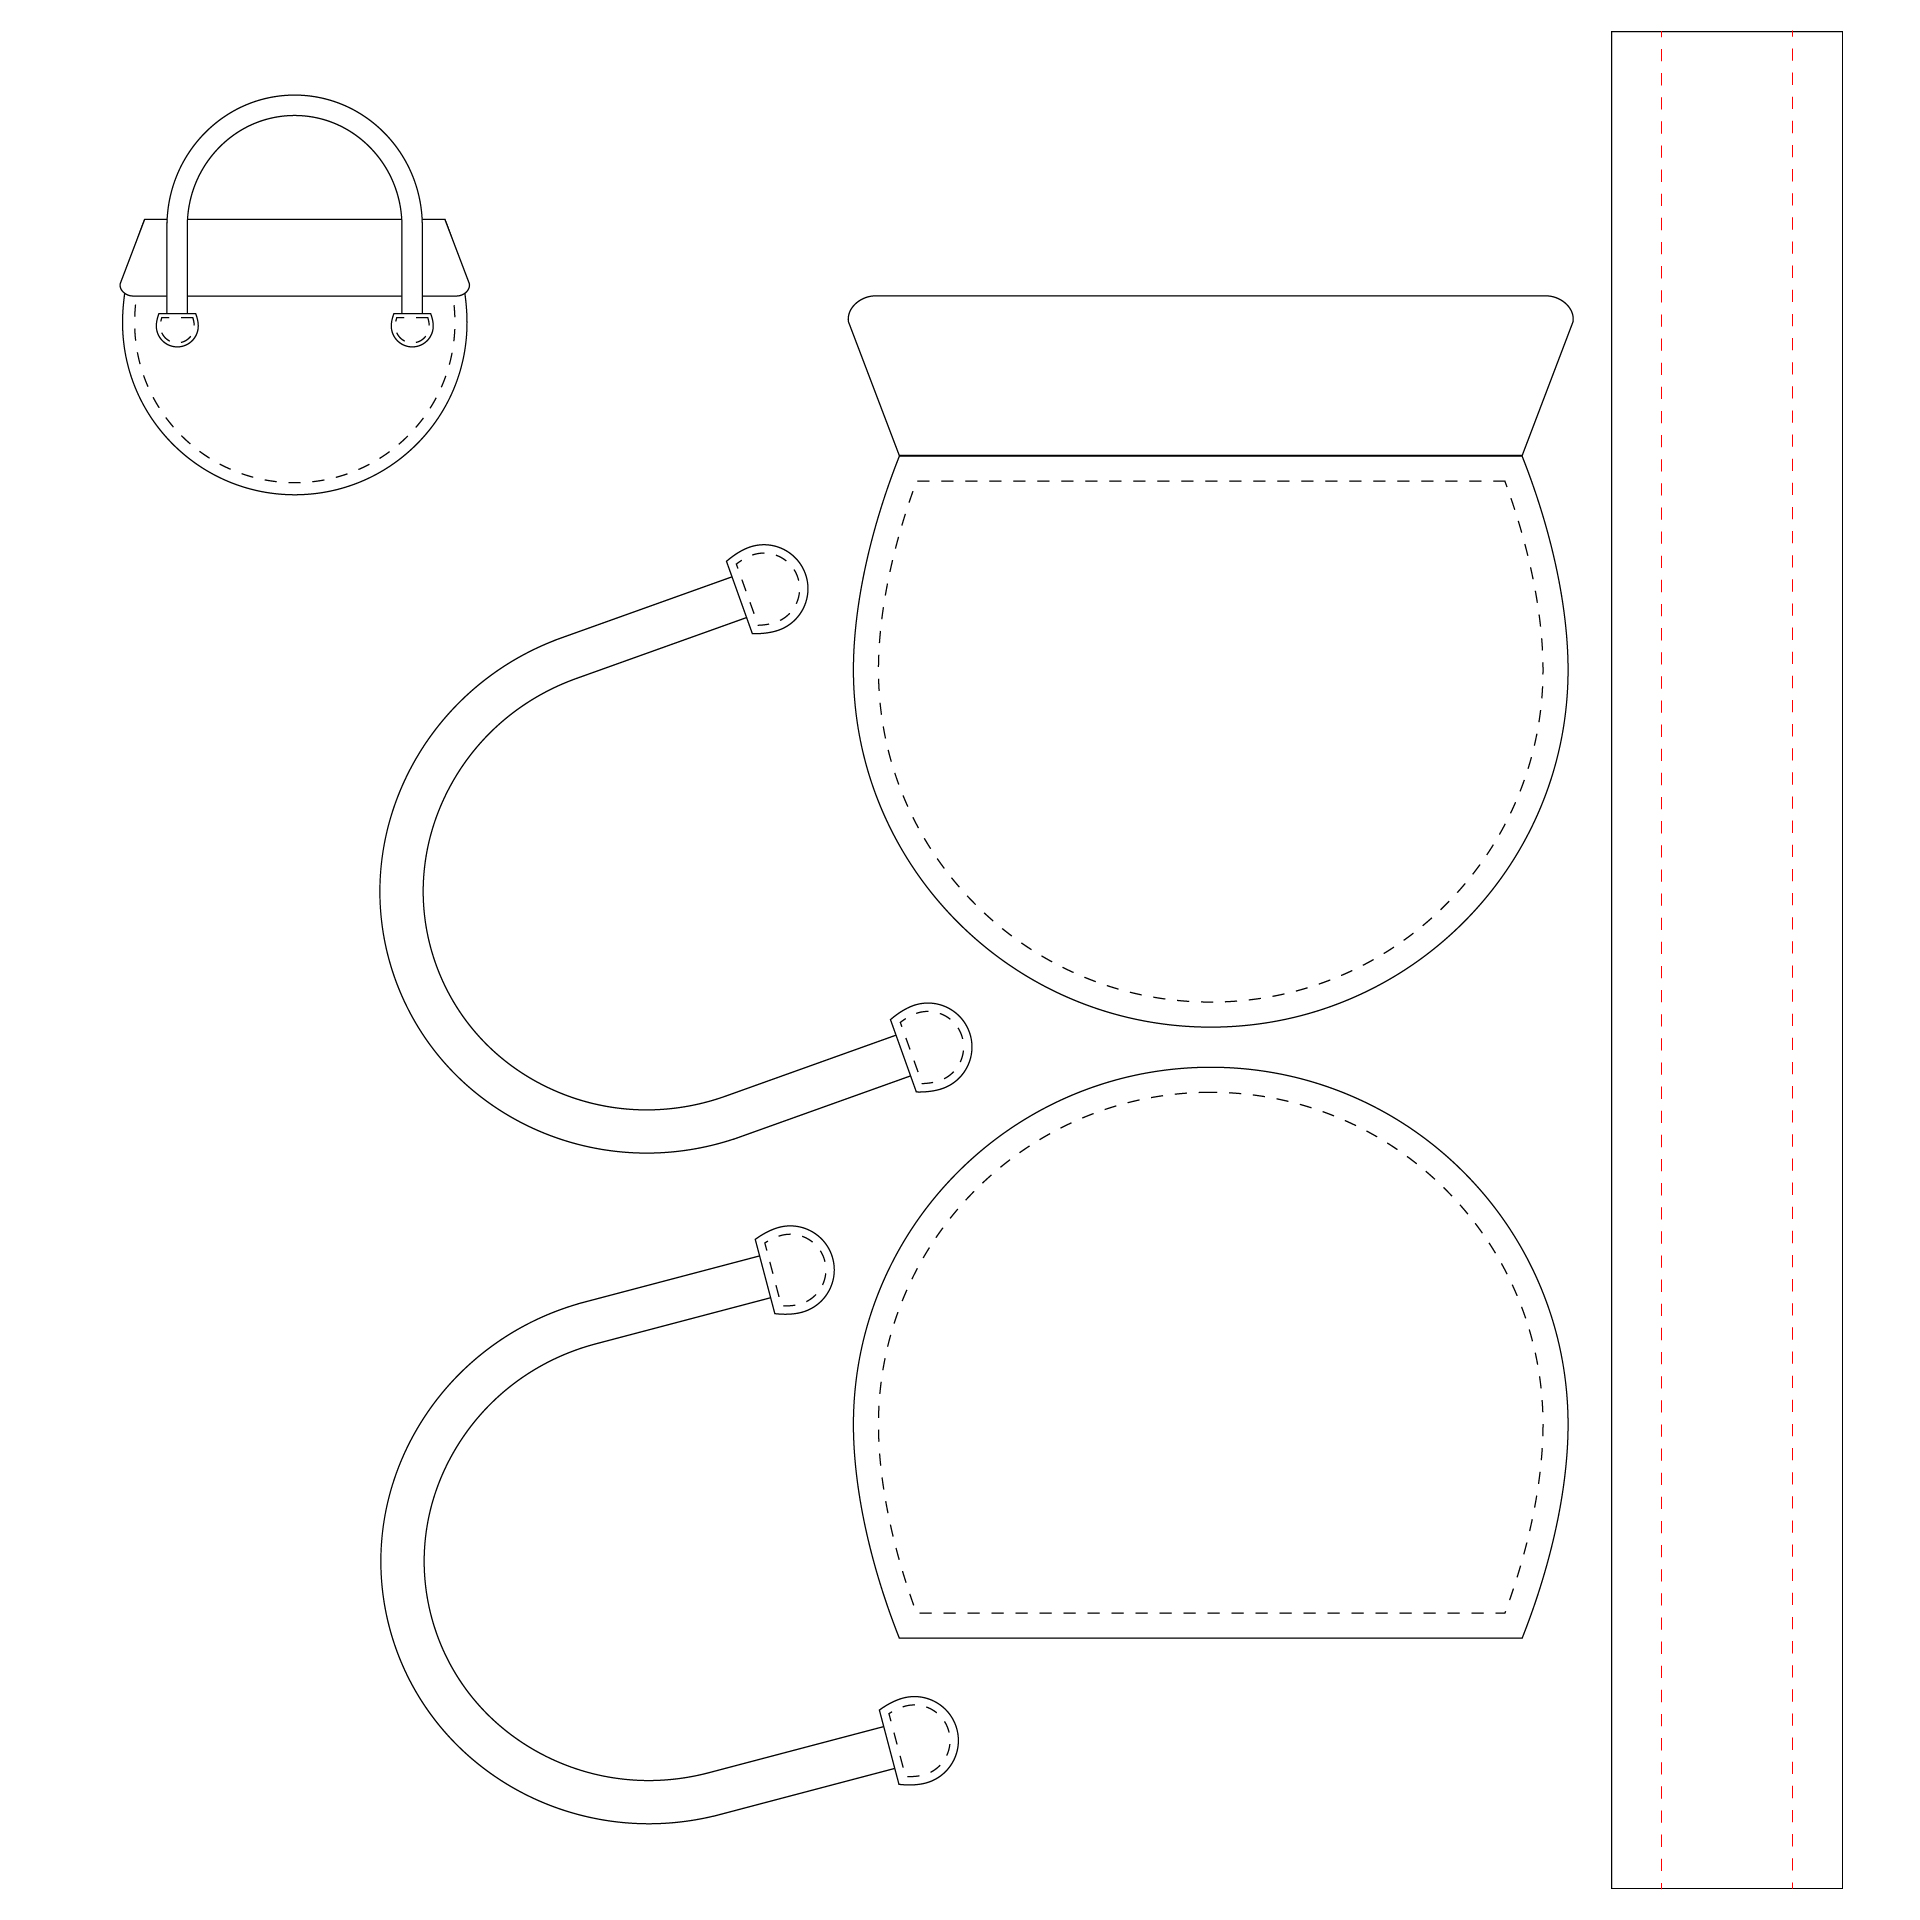 7 Best Images of Leather Handbag Patterns Printable Free Leather